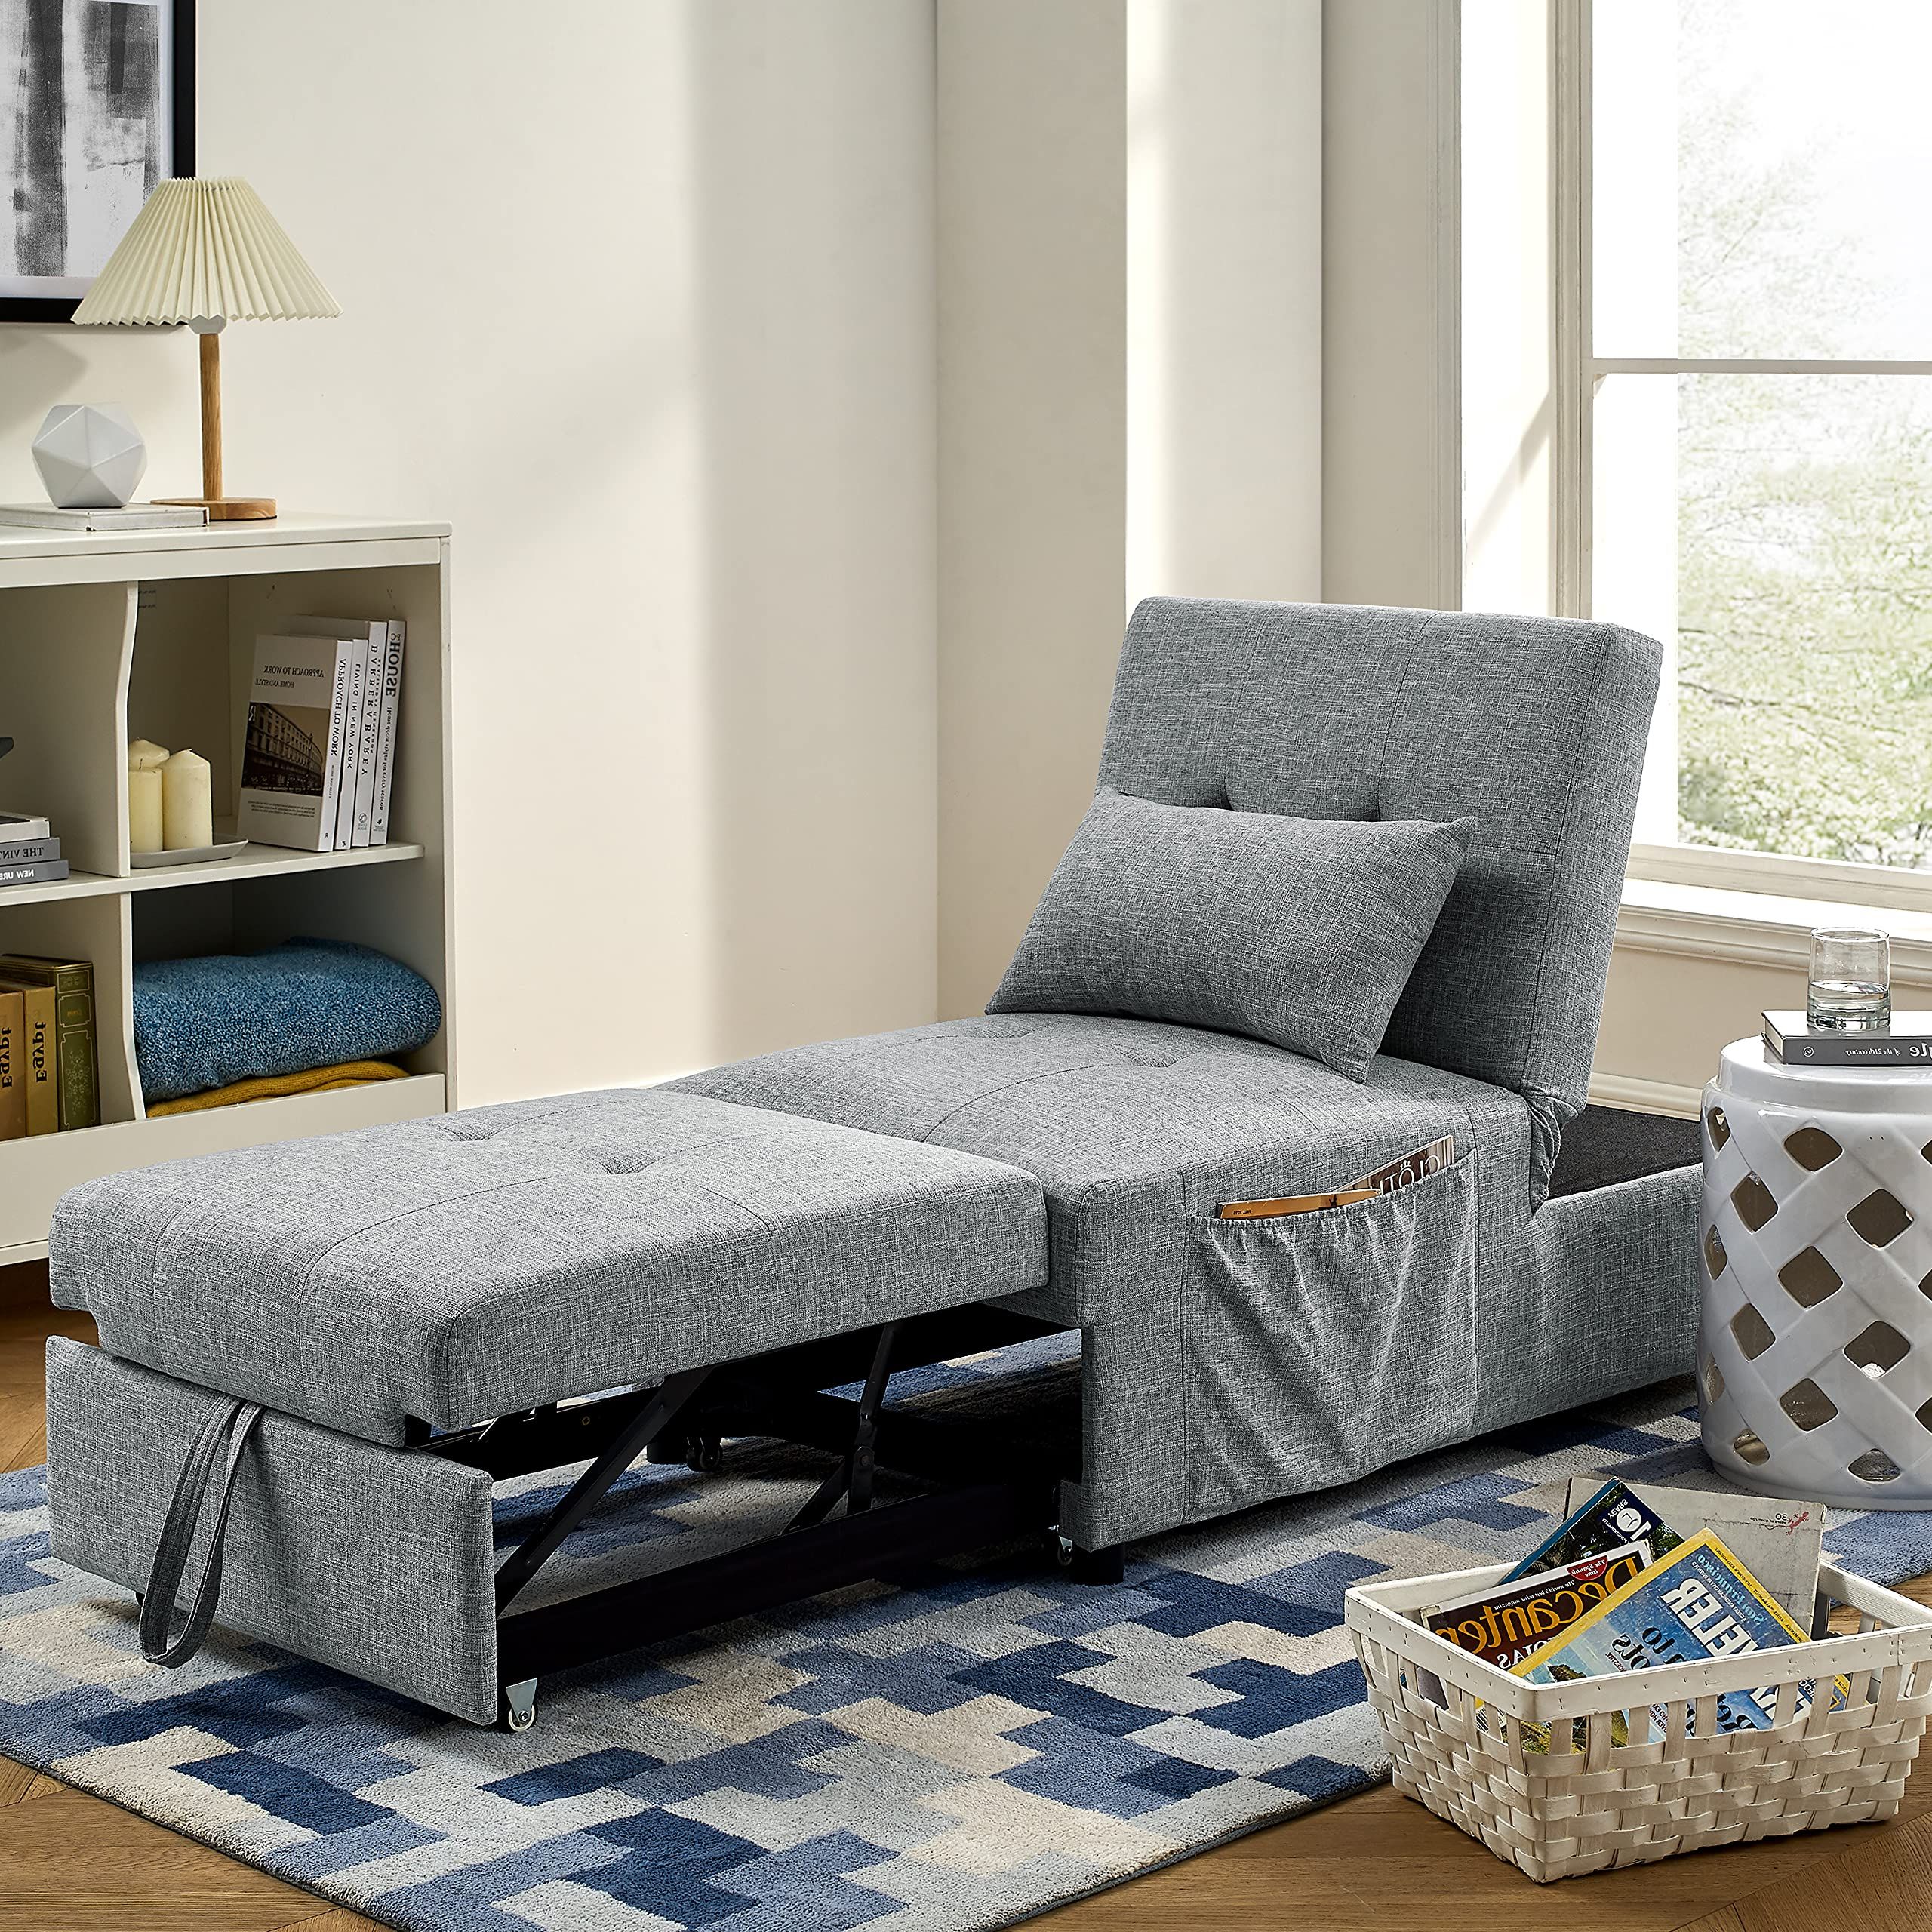 Featured Photo of 15 Best Ideas 4-in-1 Convertible Sleeper Chair Beds